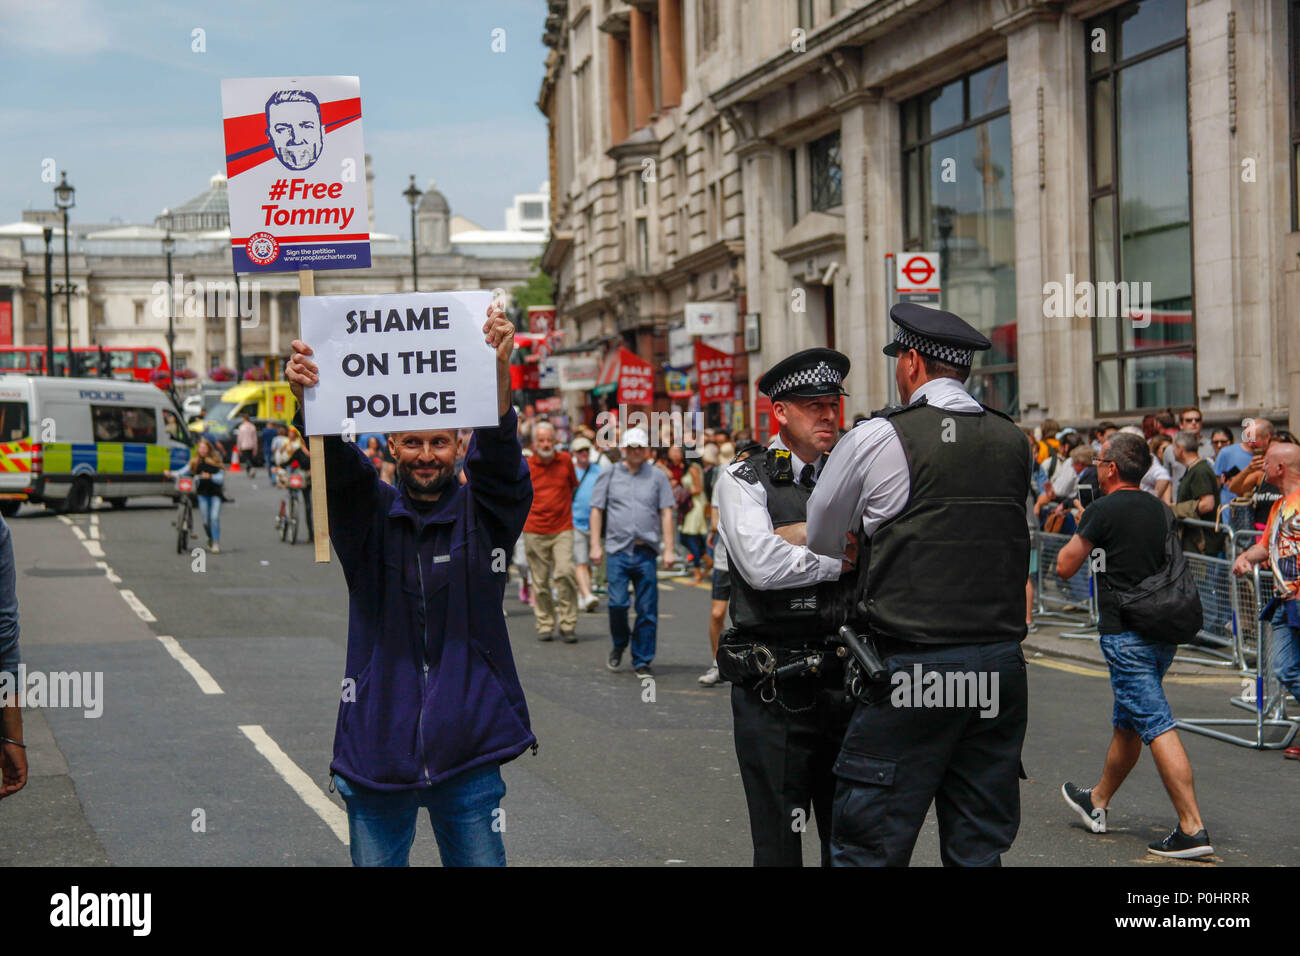 London, UK, 9 June 2018. Supporter of Tommy Robinson calls shame on the Police Credit: Alex Cavendish/Alamy Live News Stock Photo